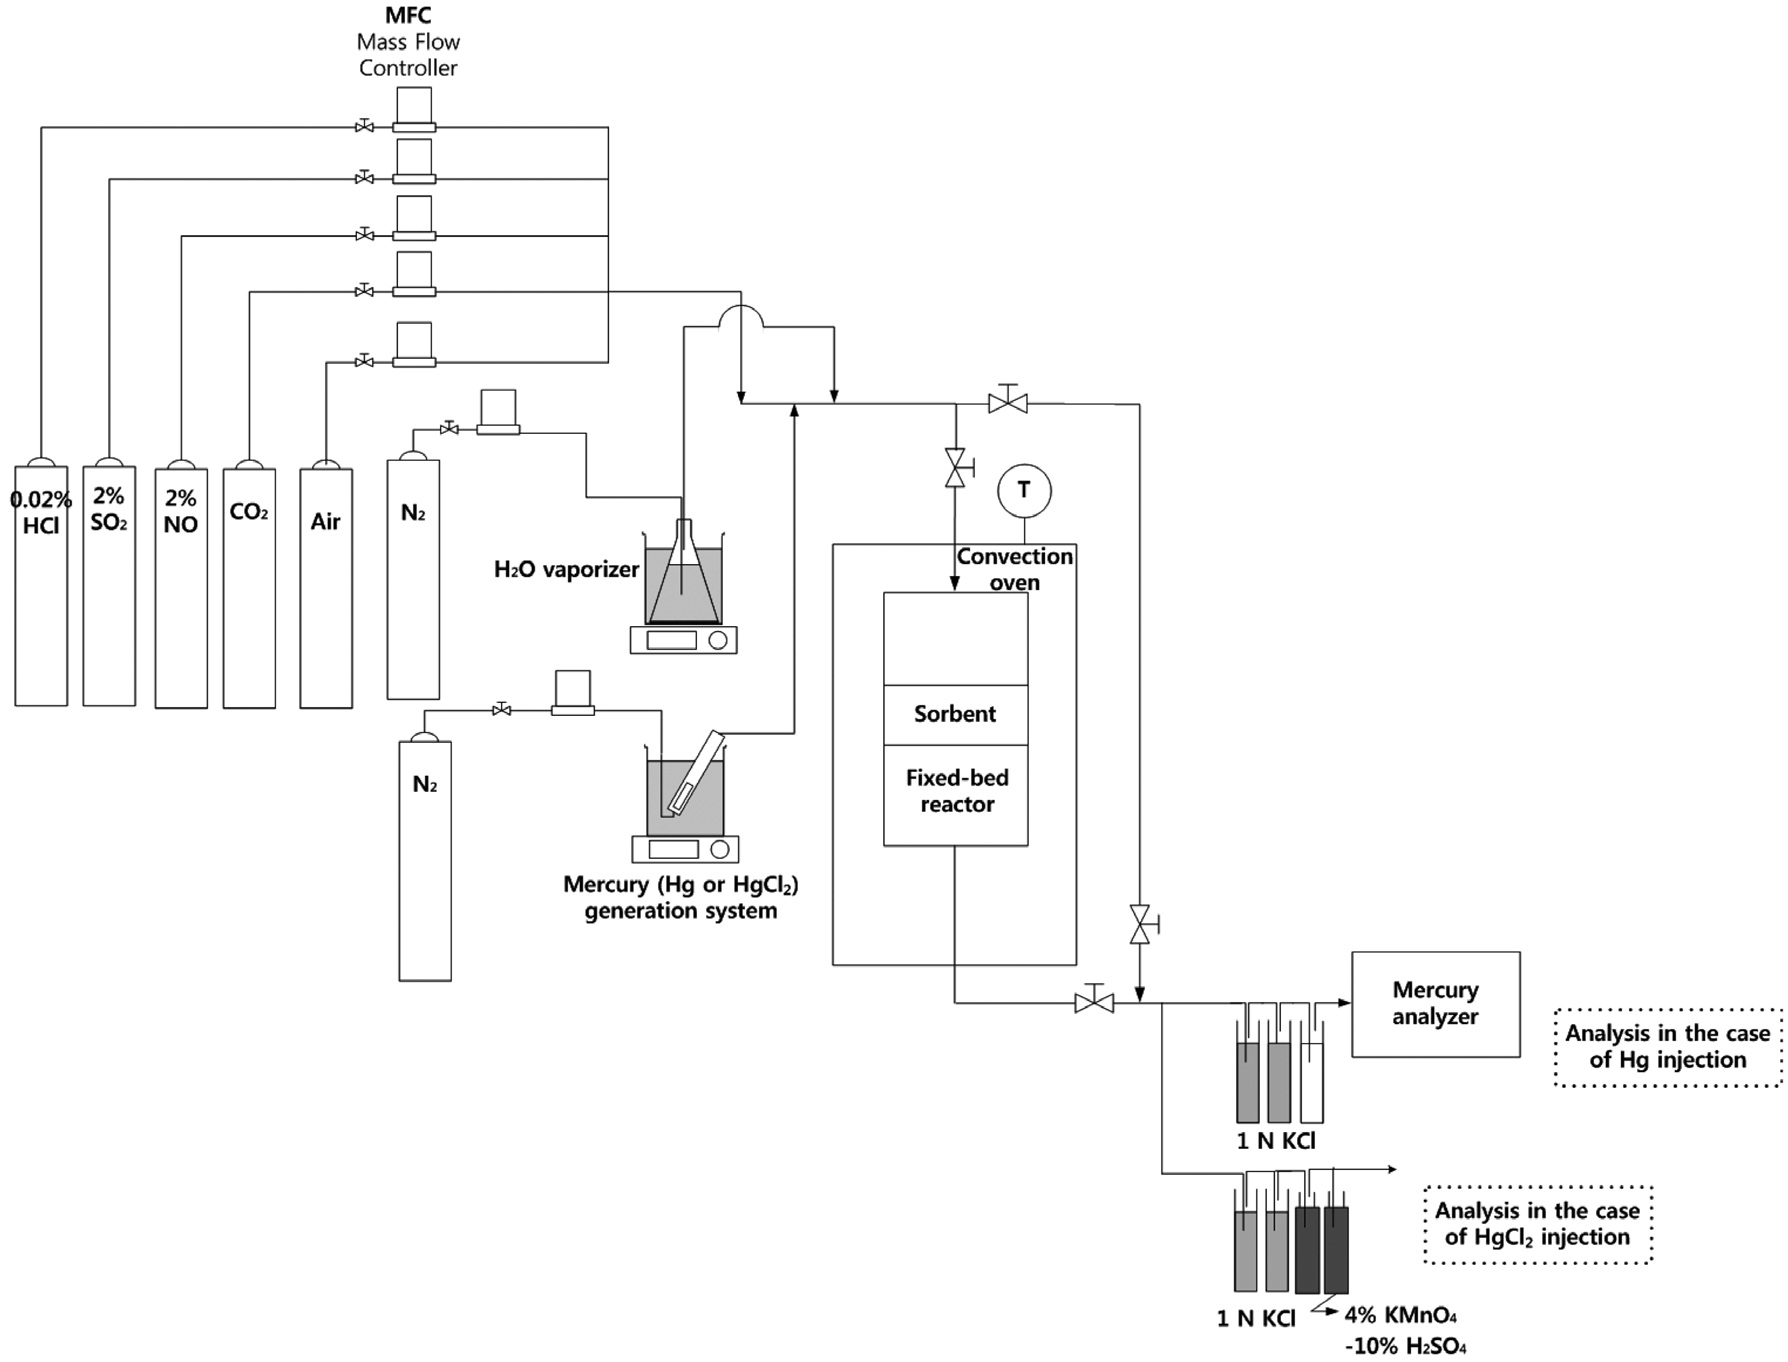 Schematic diagram of the fixed-bed reactor system.